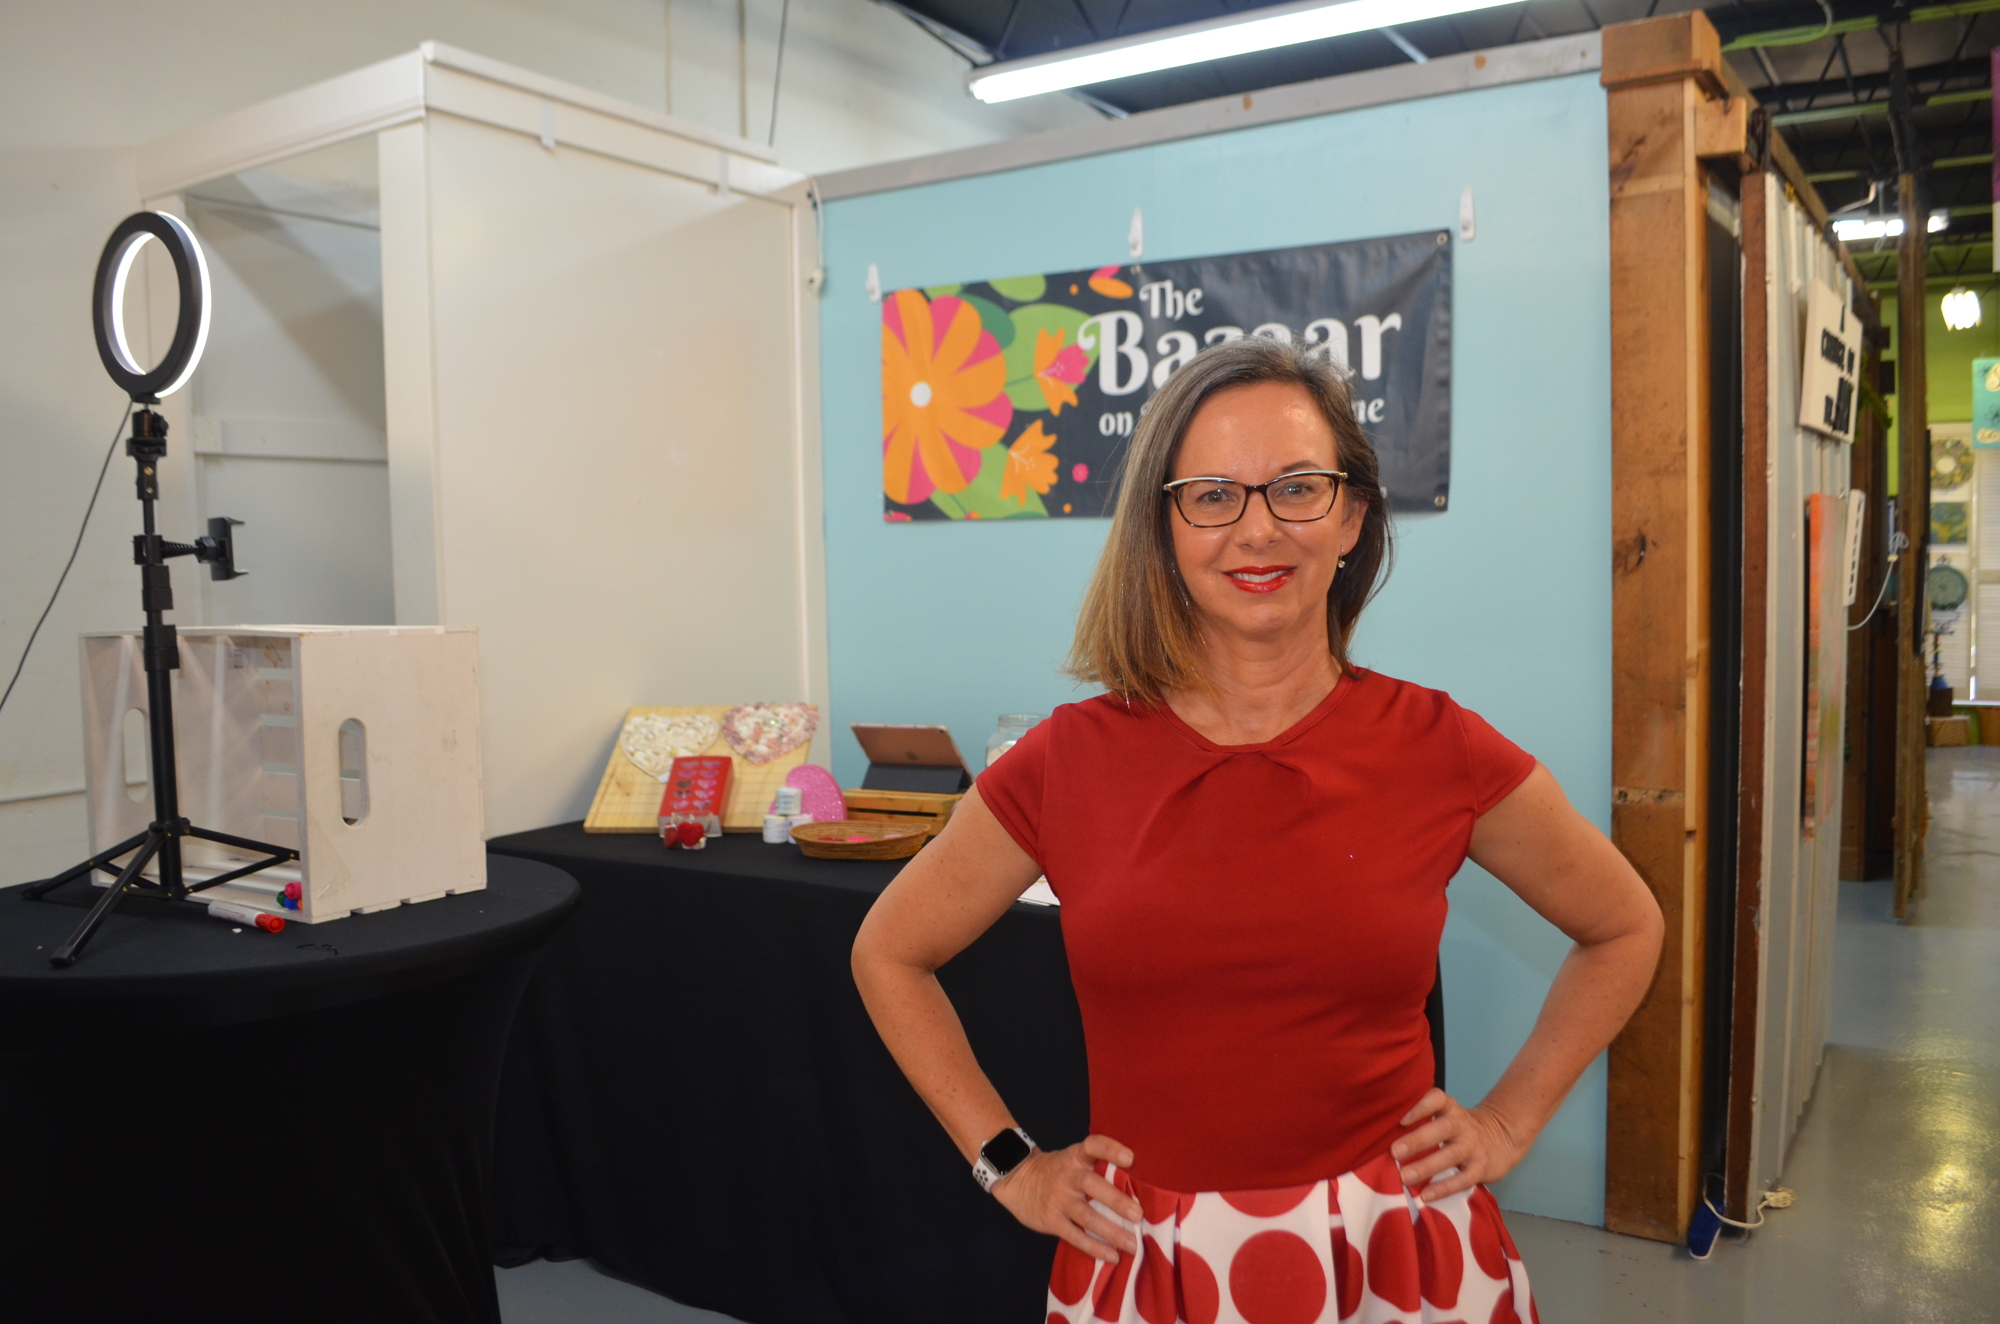 Kim Livengood hosts daily broadcasts featuring goods from vendors at The Bazaar on Apricot and Lime.